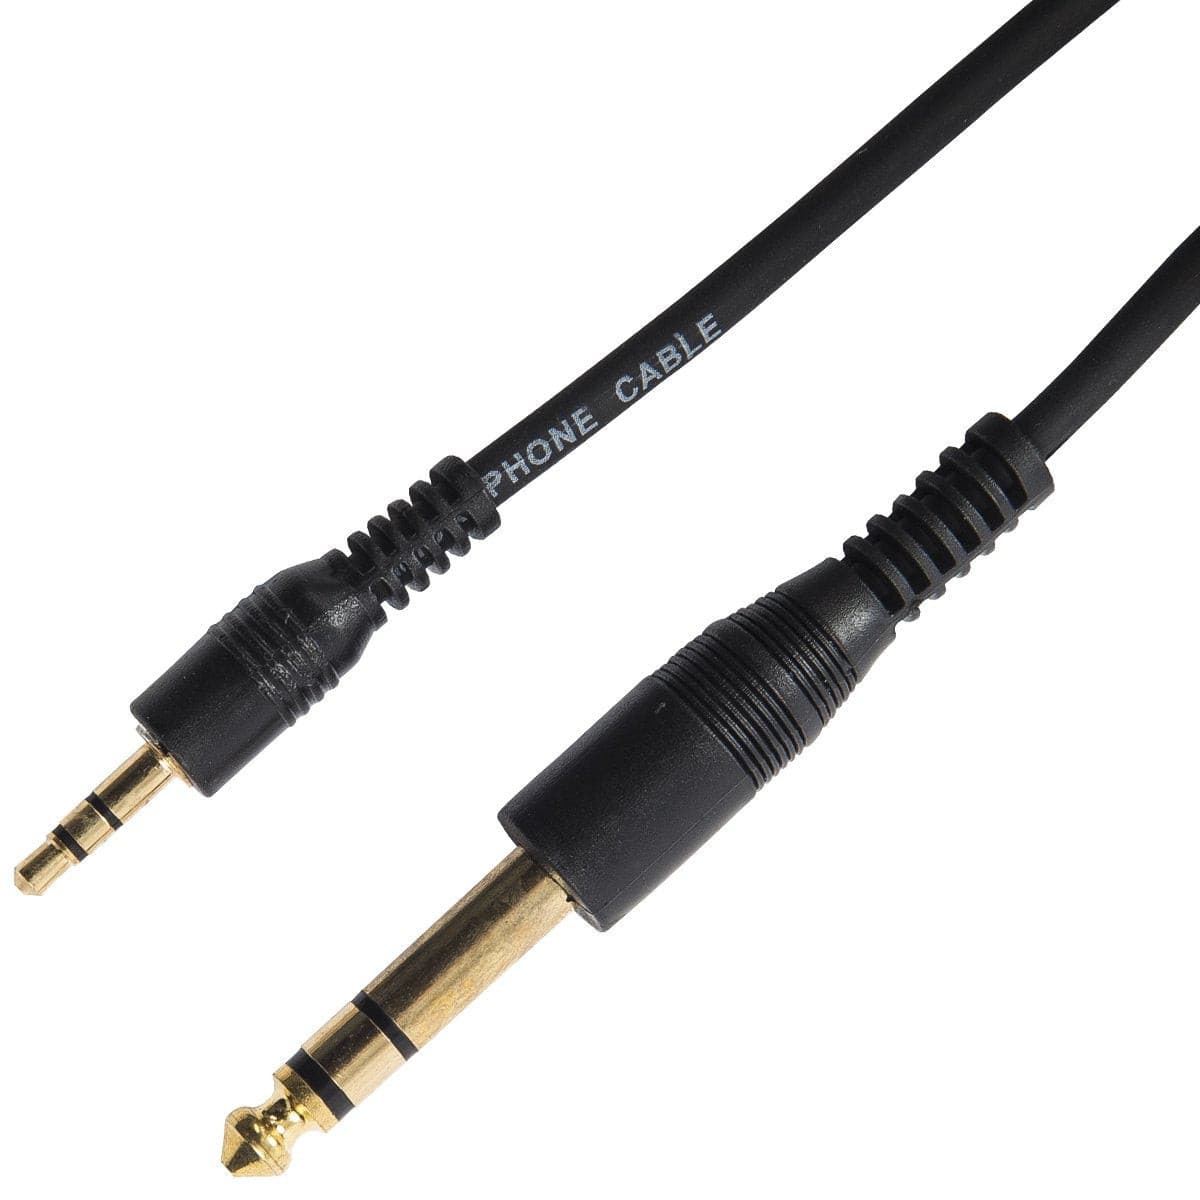 Kinsman Standard Soundcard Cable - 3.5mm Stereo/6.35mm Stereo - 10ft/3m, Cables, Microphones & Headphones for sale at Richards Guitars.